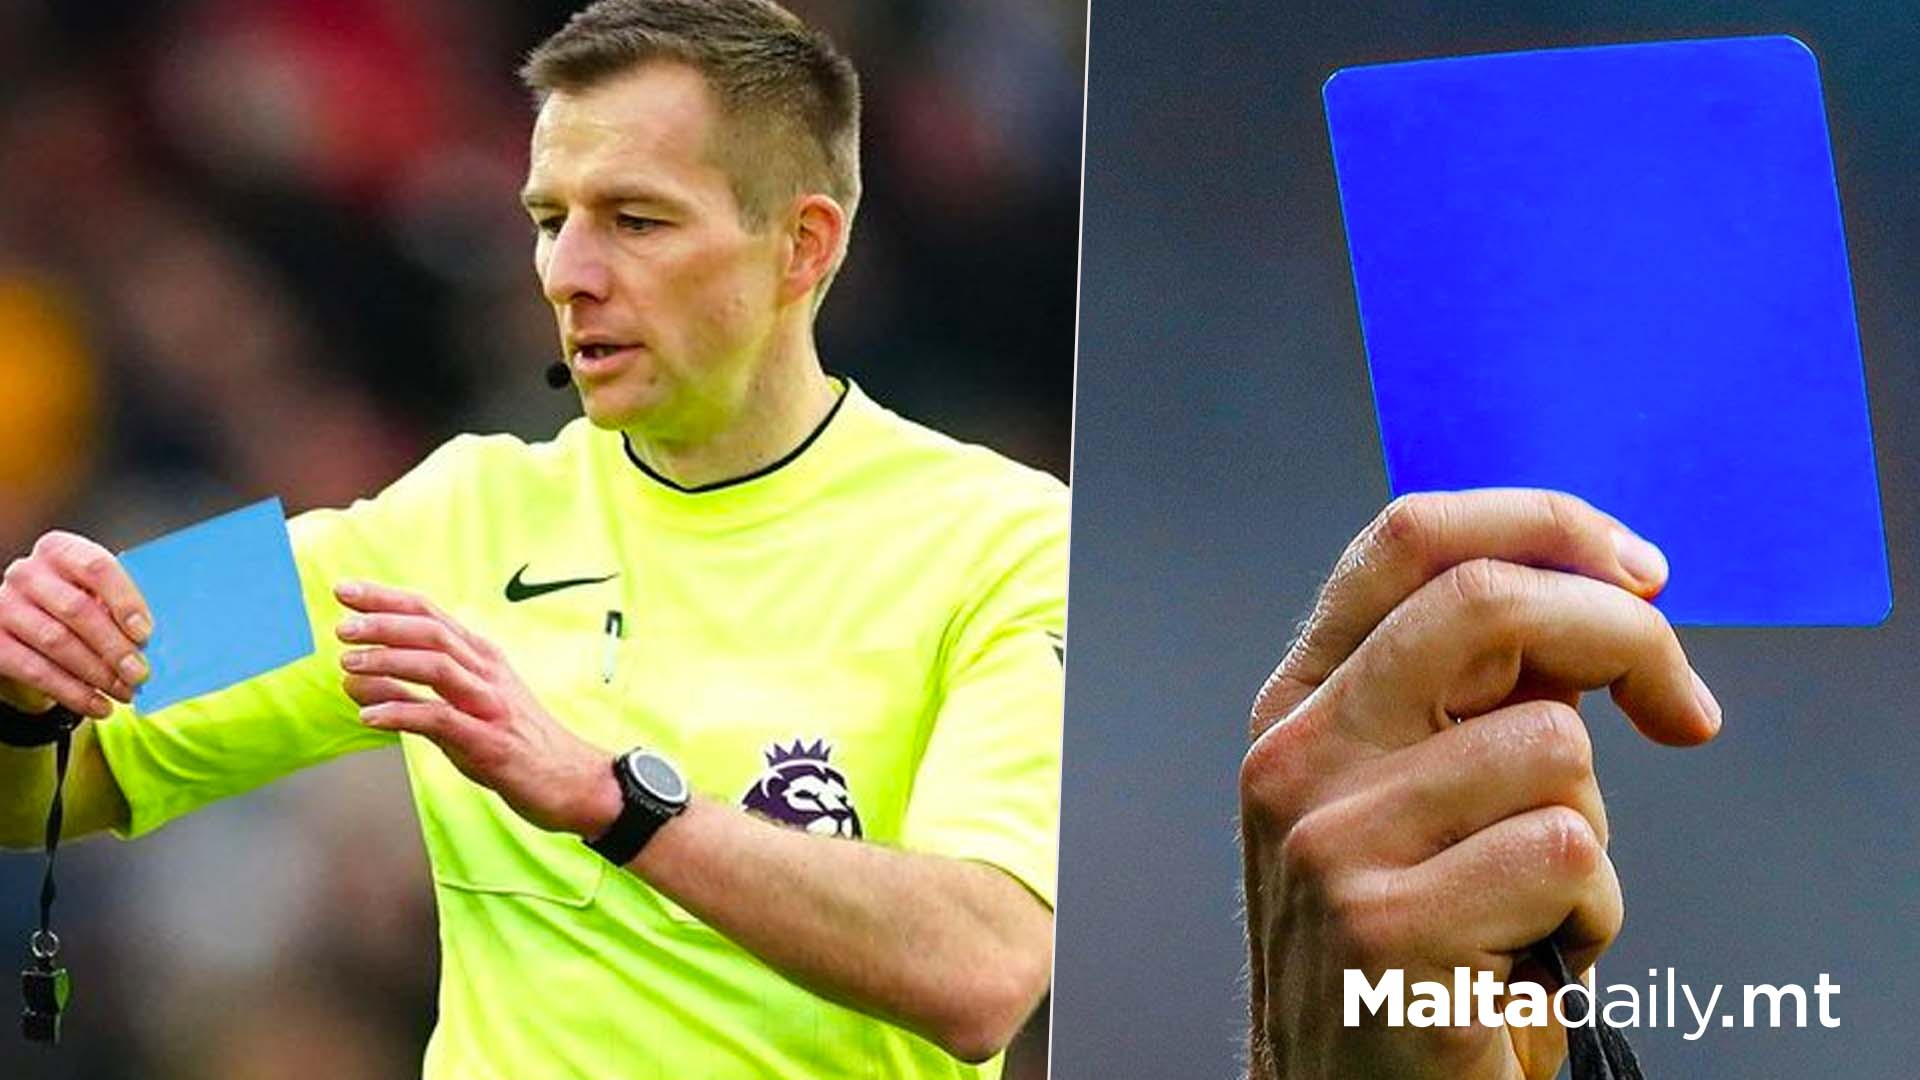 Professional Football Set To Introduce Blue Cards